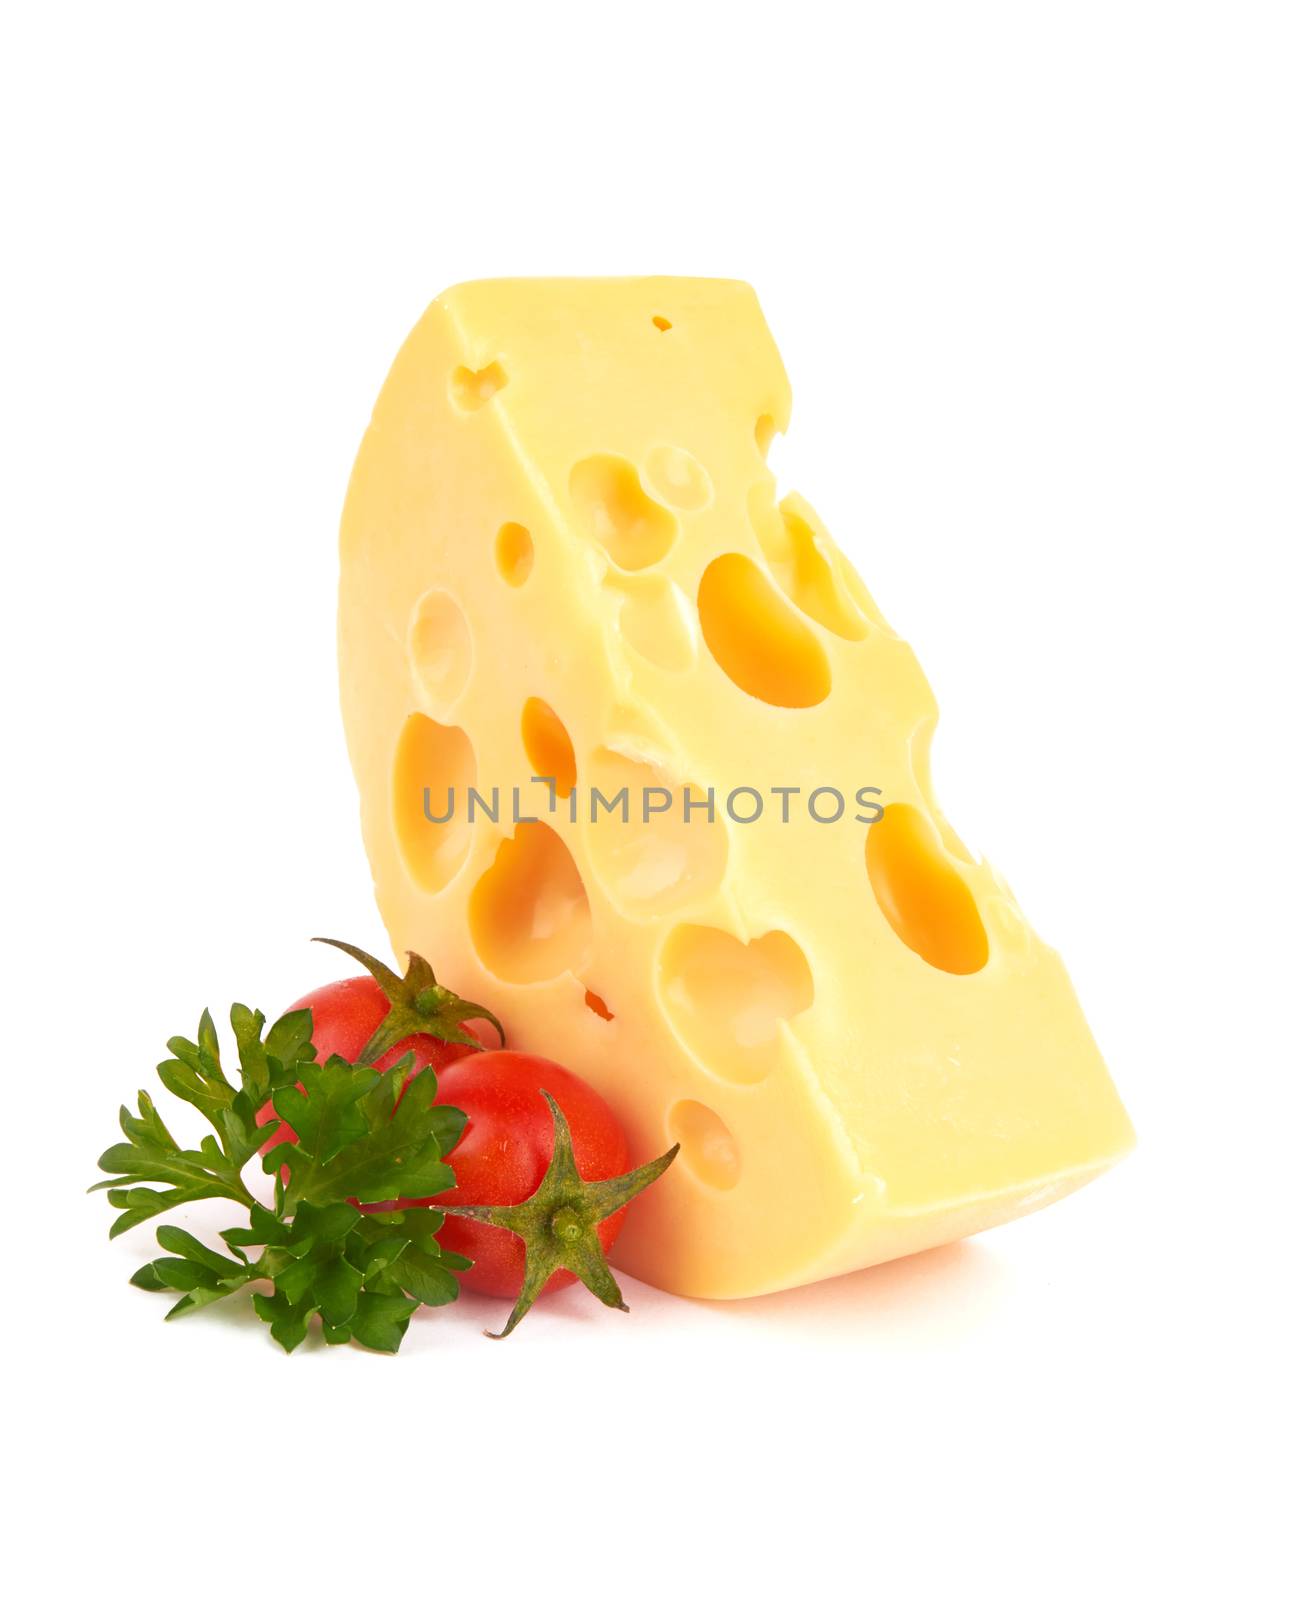 Piece of cheese isolated on white background